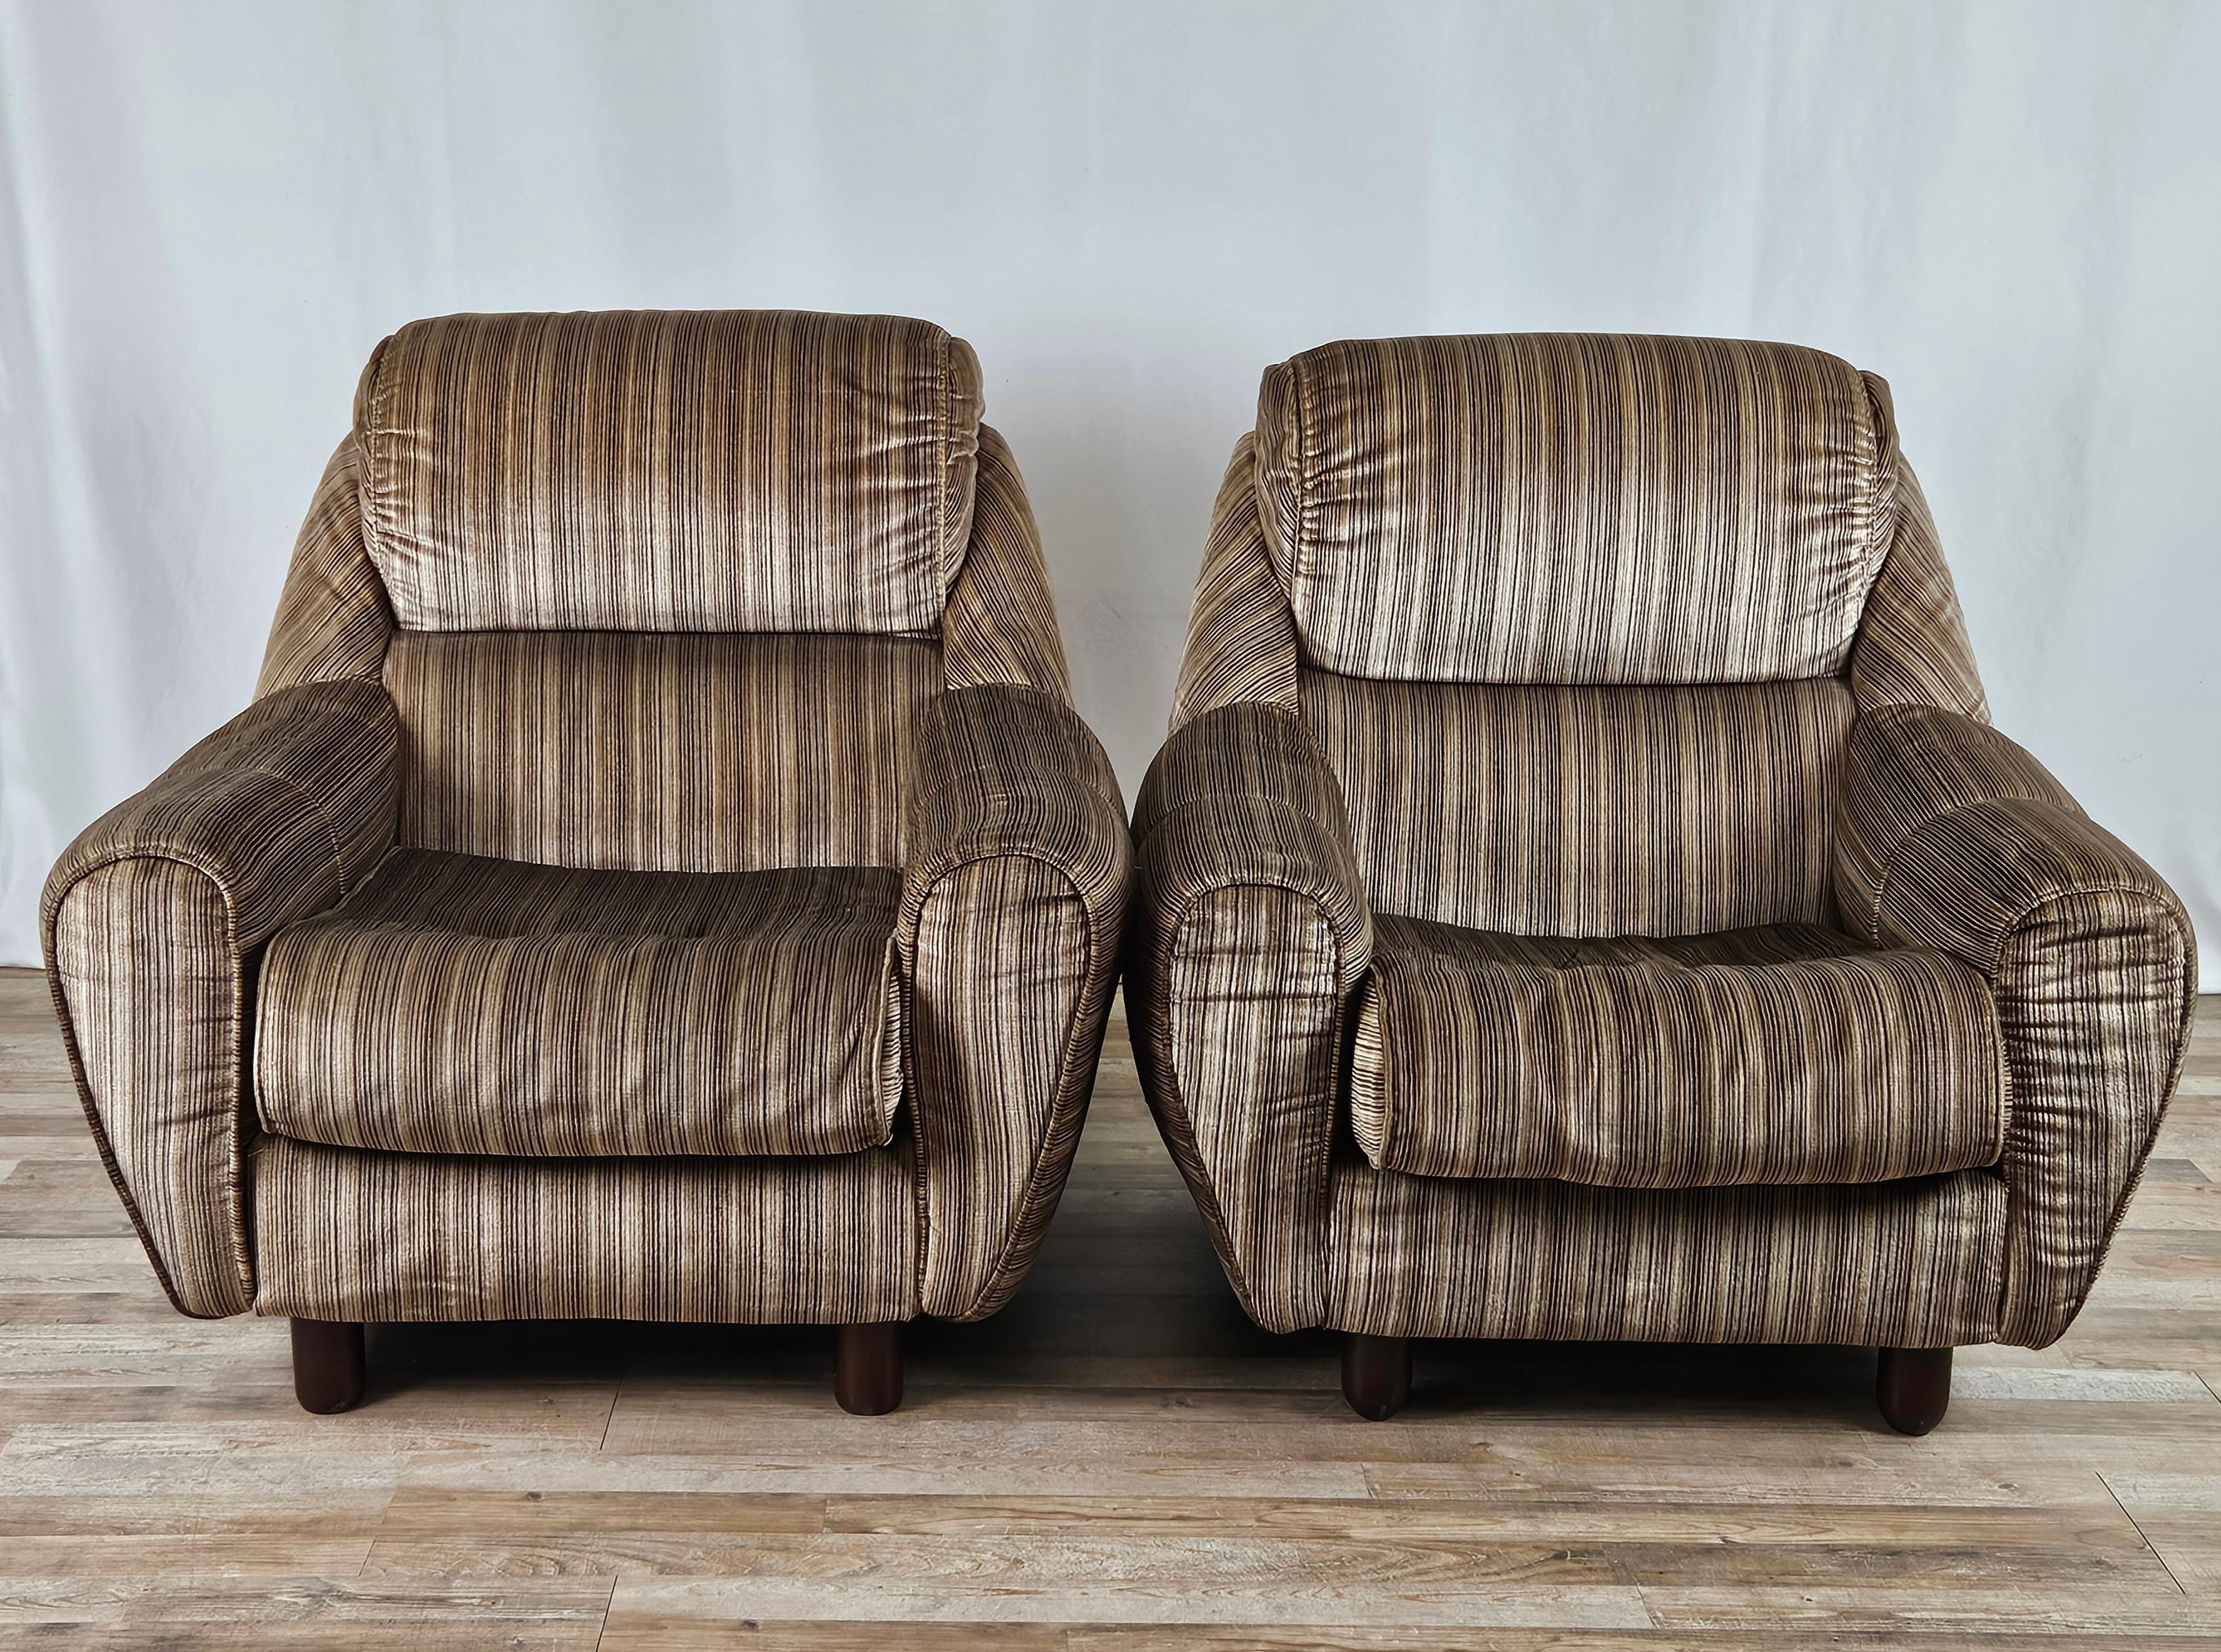 Pair of 1970s fabric armchairs with brown plastic feet.

Italian furniture elements designed and conceived for living rooms and rooms with any type of furniture.

They show normal signs of wear due to age and use.
The seats have sagged slightly but